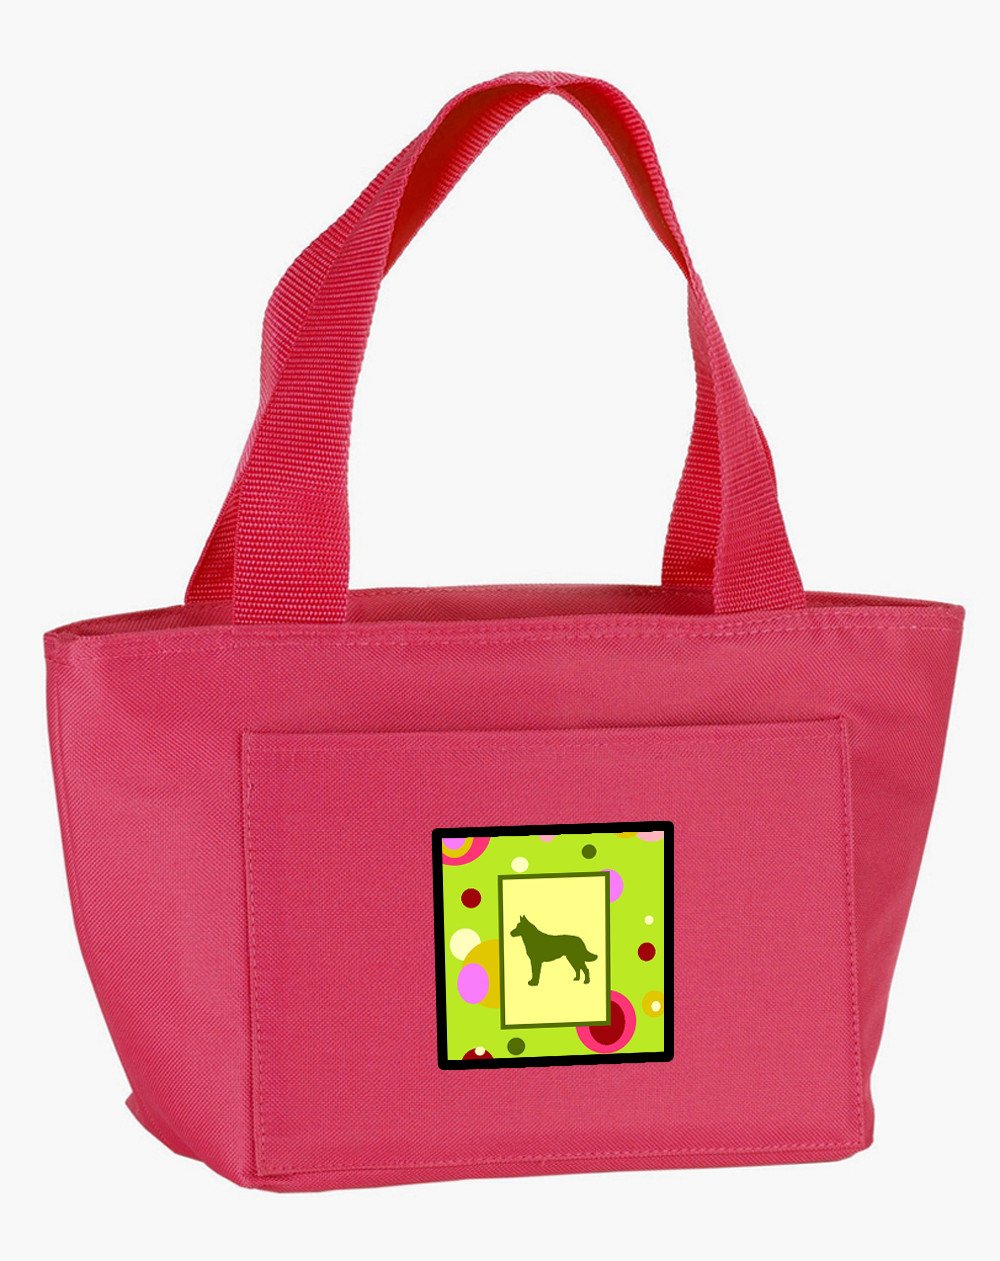 Lime Green Dots Malinois  Lunch Bag CK1114PK-8808 by Caroline's Treasures